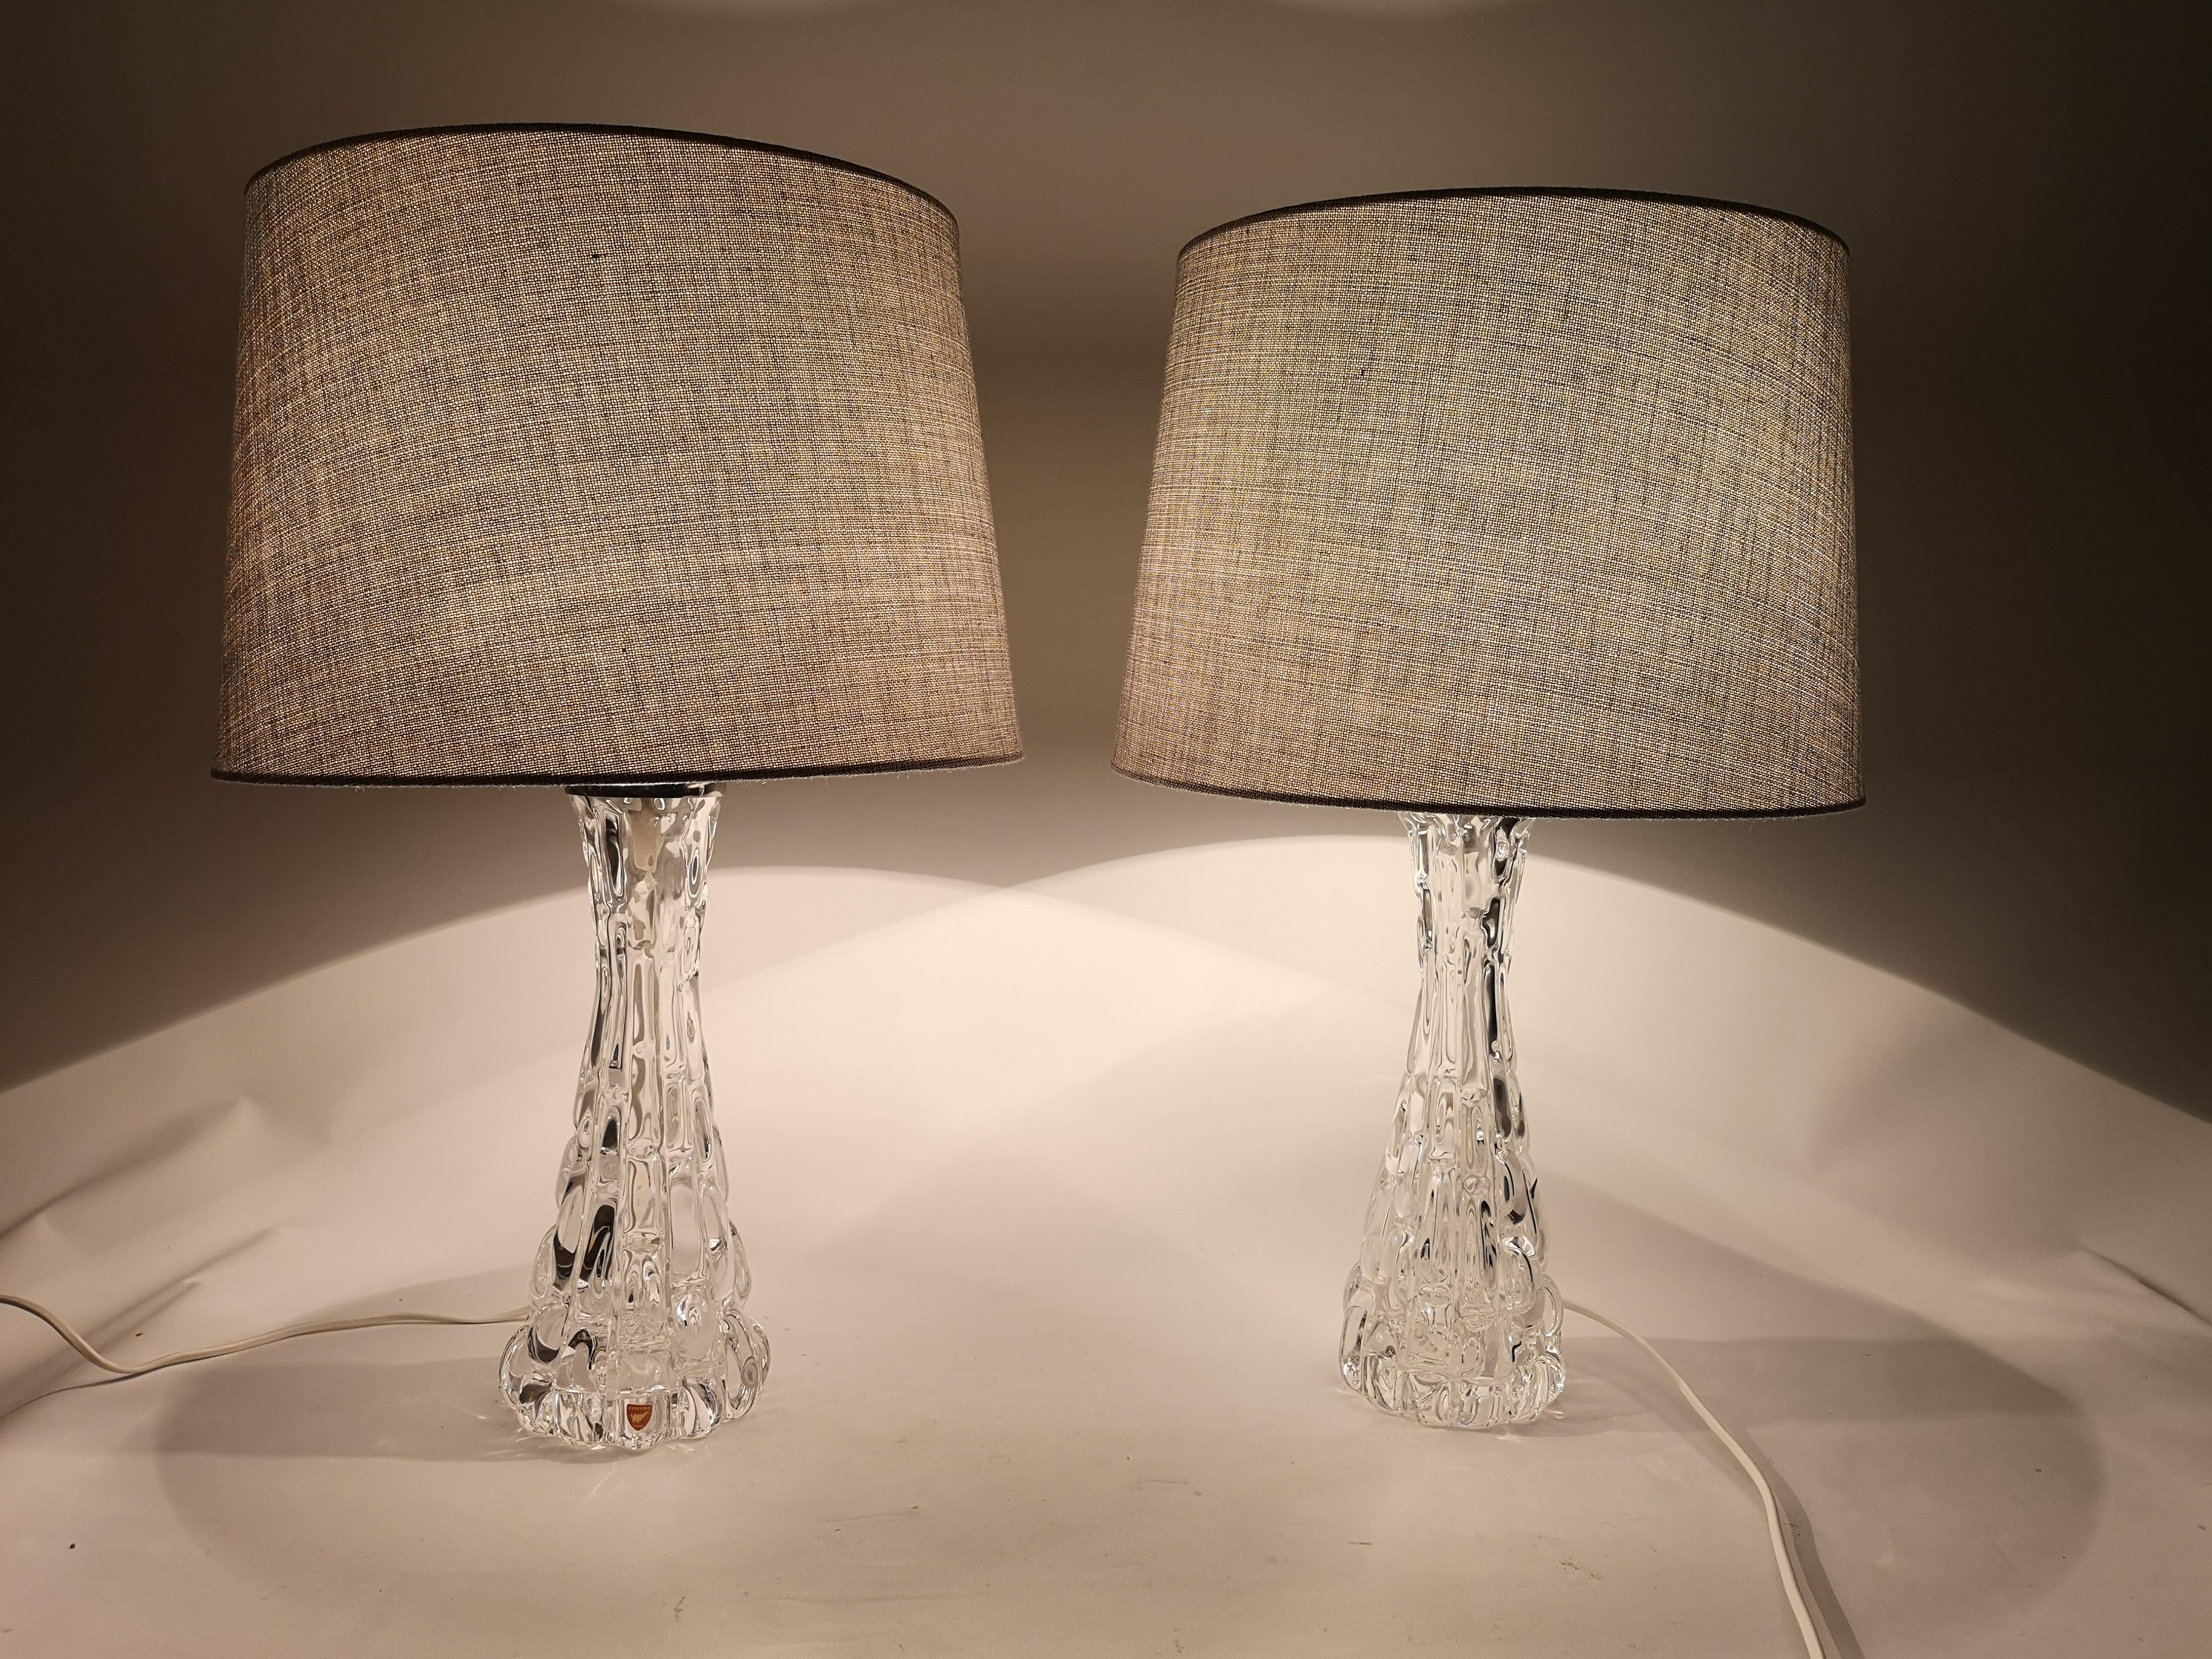 Exceptional pair of heavy hourglass form crystal lamps with polished nickel fittings. The lamps were made in Sweden at Orrefors glasbruk.
The designer Carl Fagerlund has created at glass that perfectly combines art and function. 

They are sold